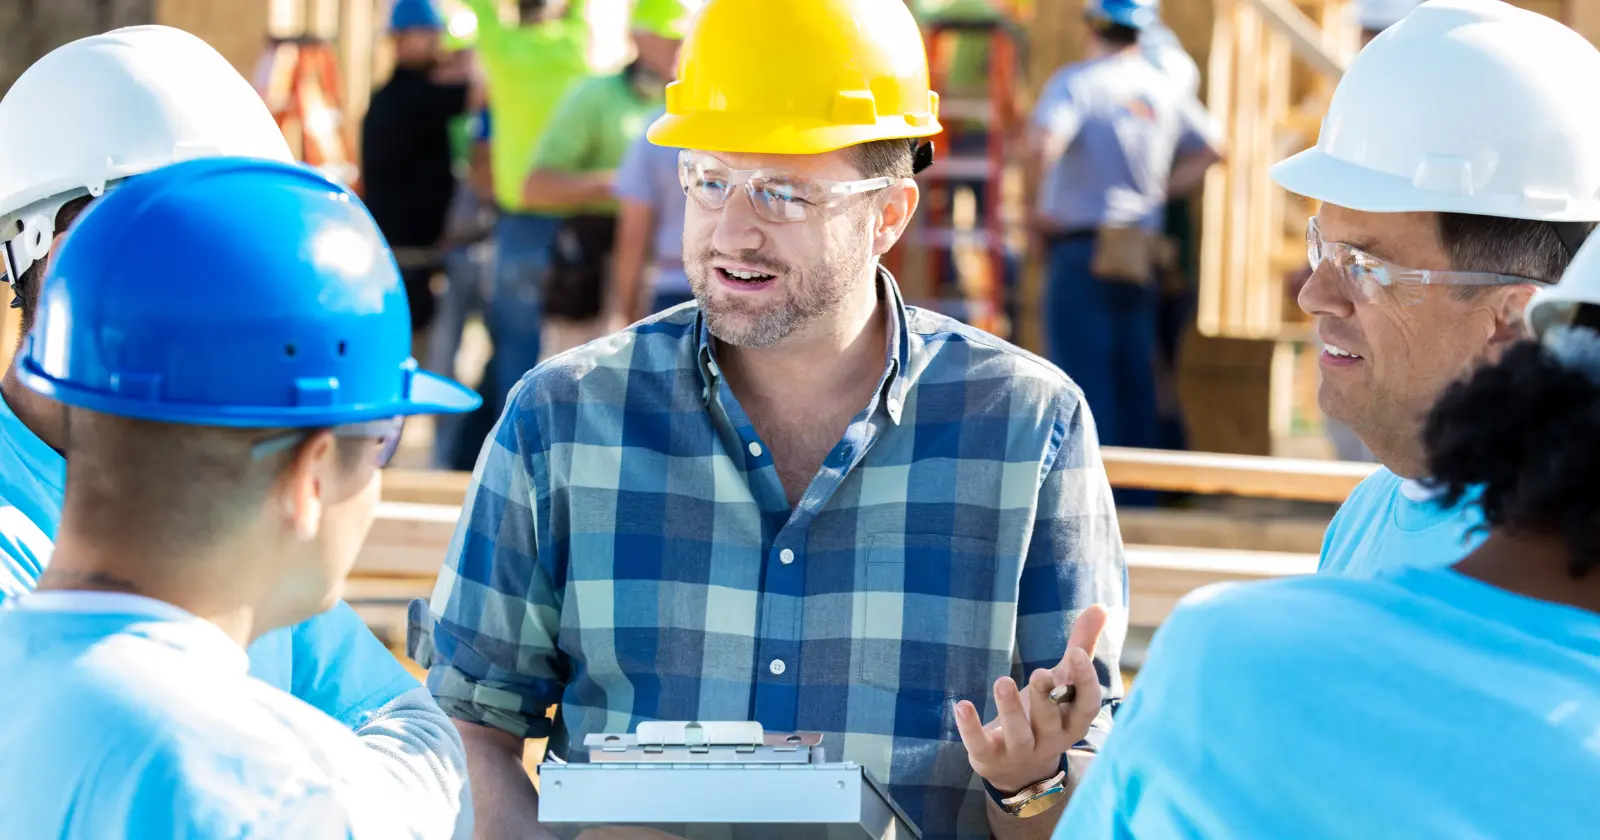 construction professional on a work site with a yellow hard hat and in a group of men